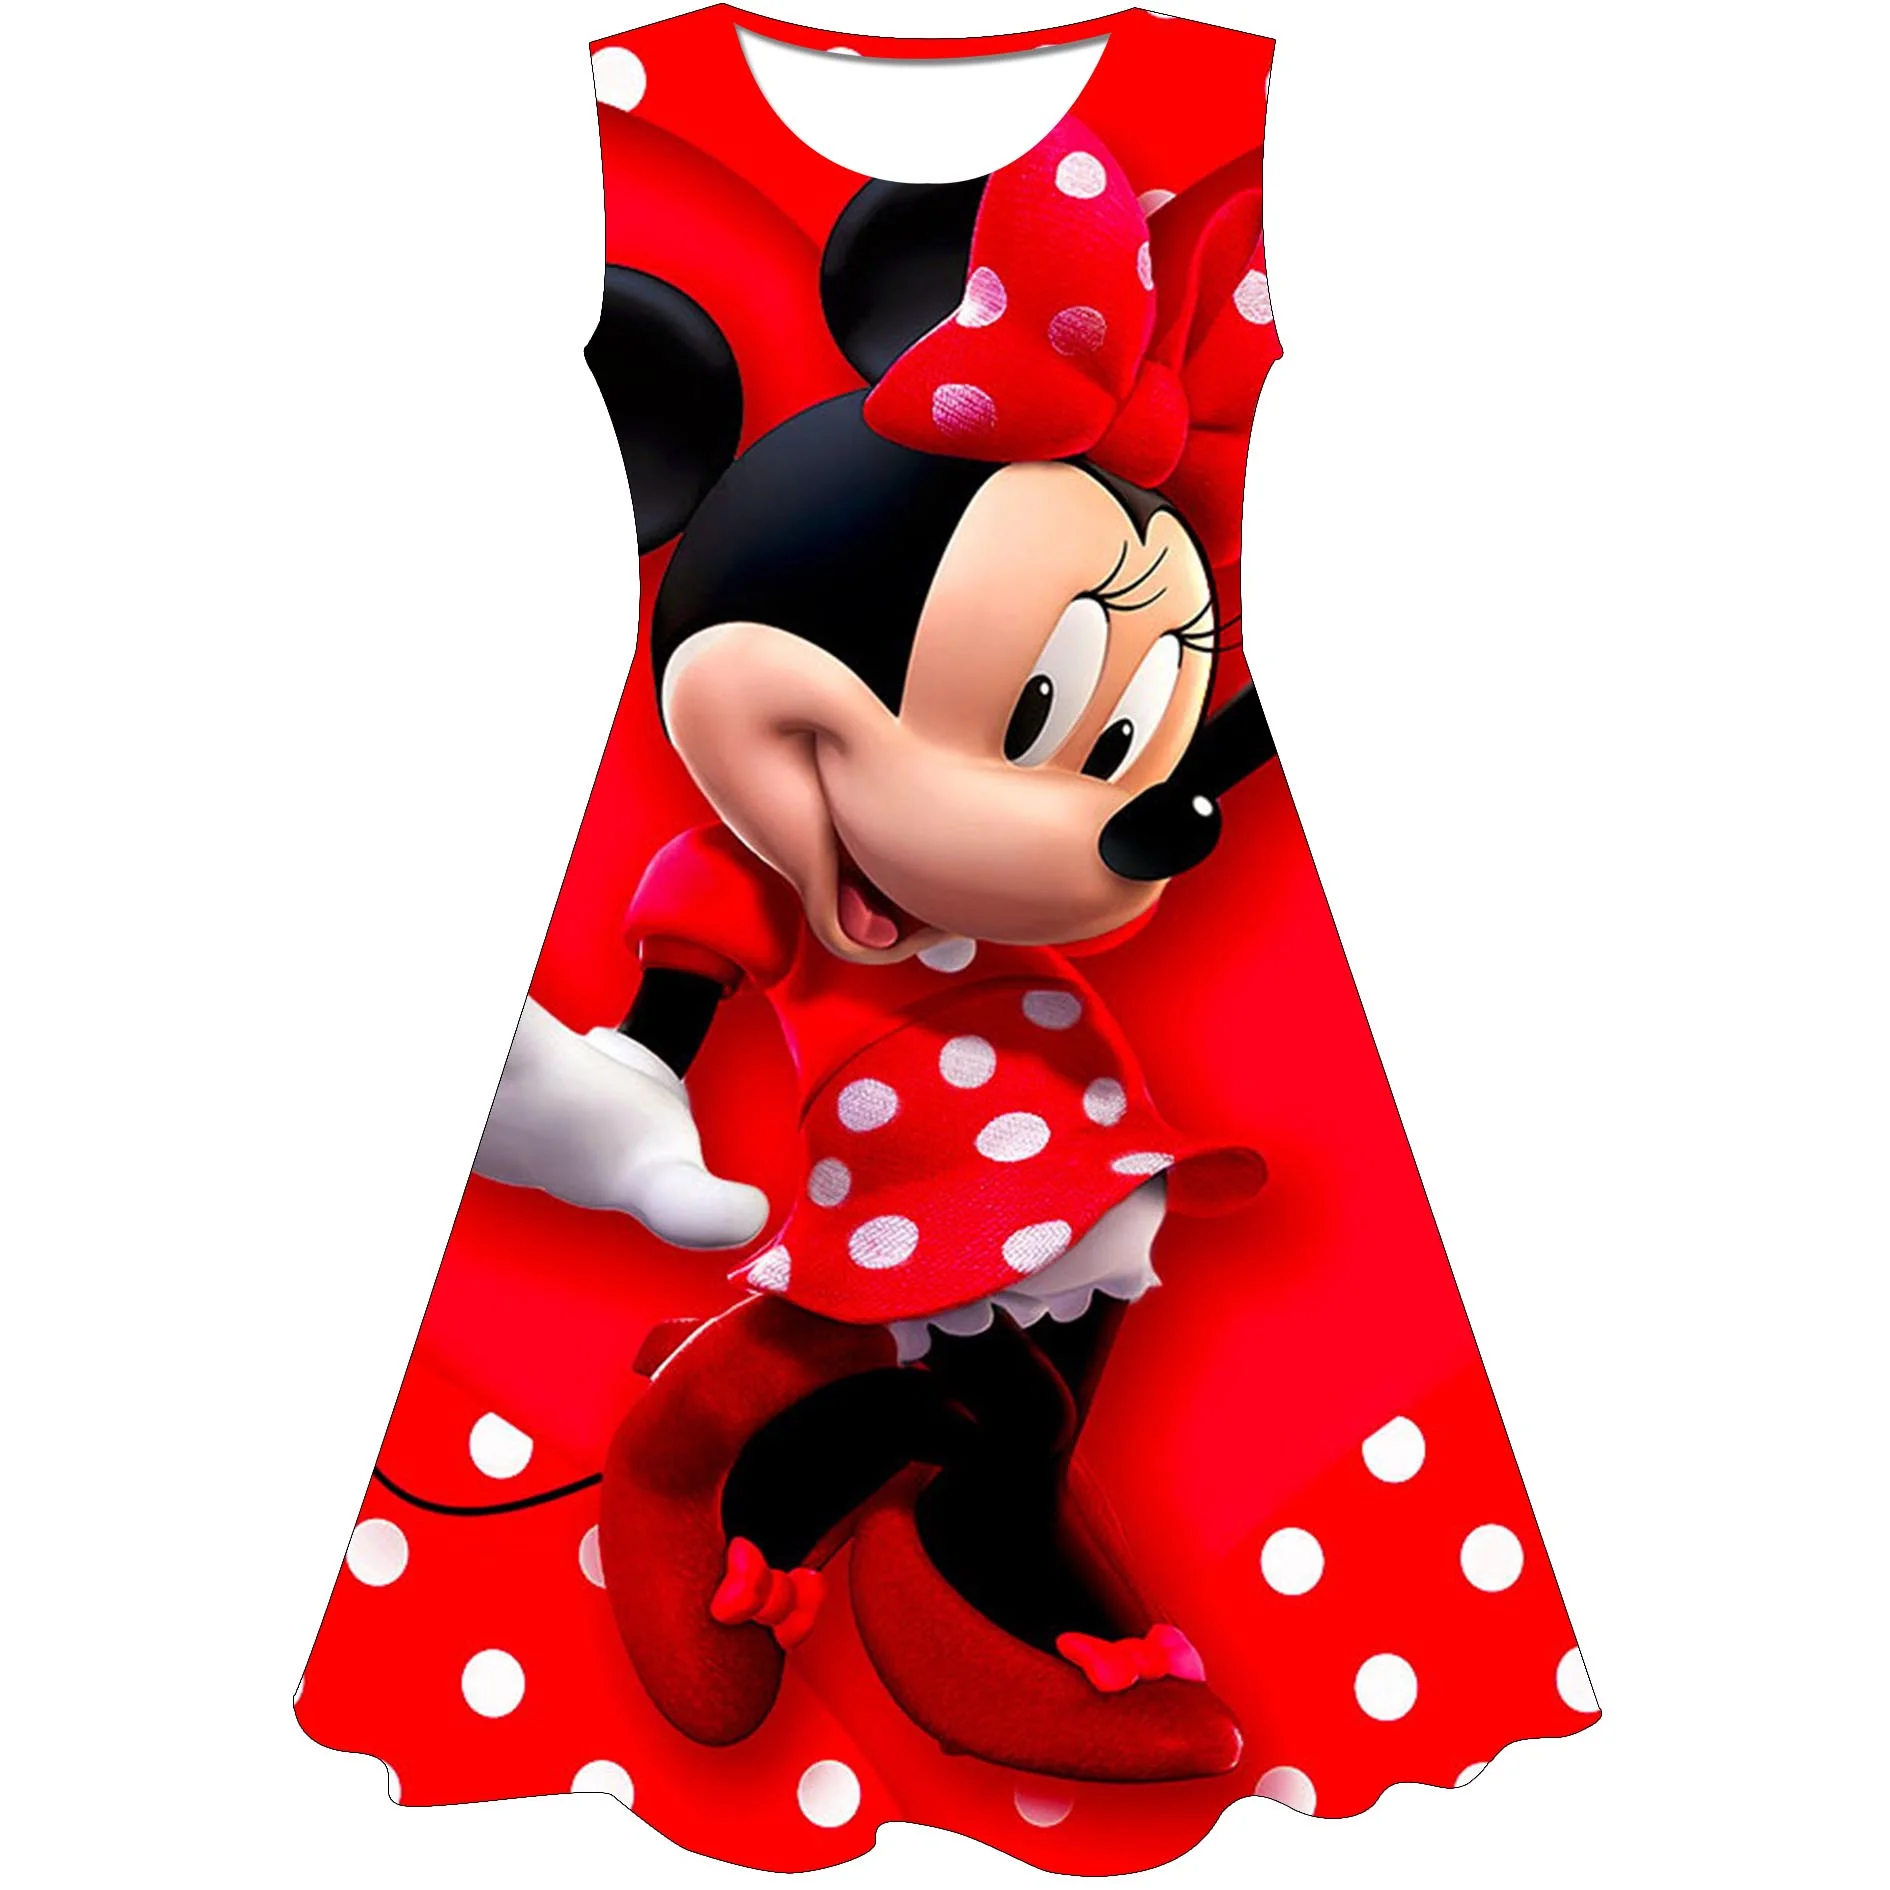 

Pretty Girls Princess Party Dresses for 1-10 Yrs Kids Disney Minnie Mouse Print Party Clothing Dress 1-10 Years Girls Gift